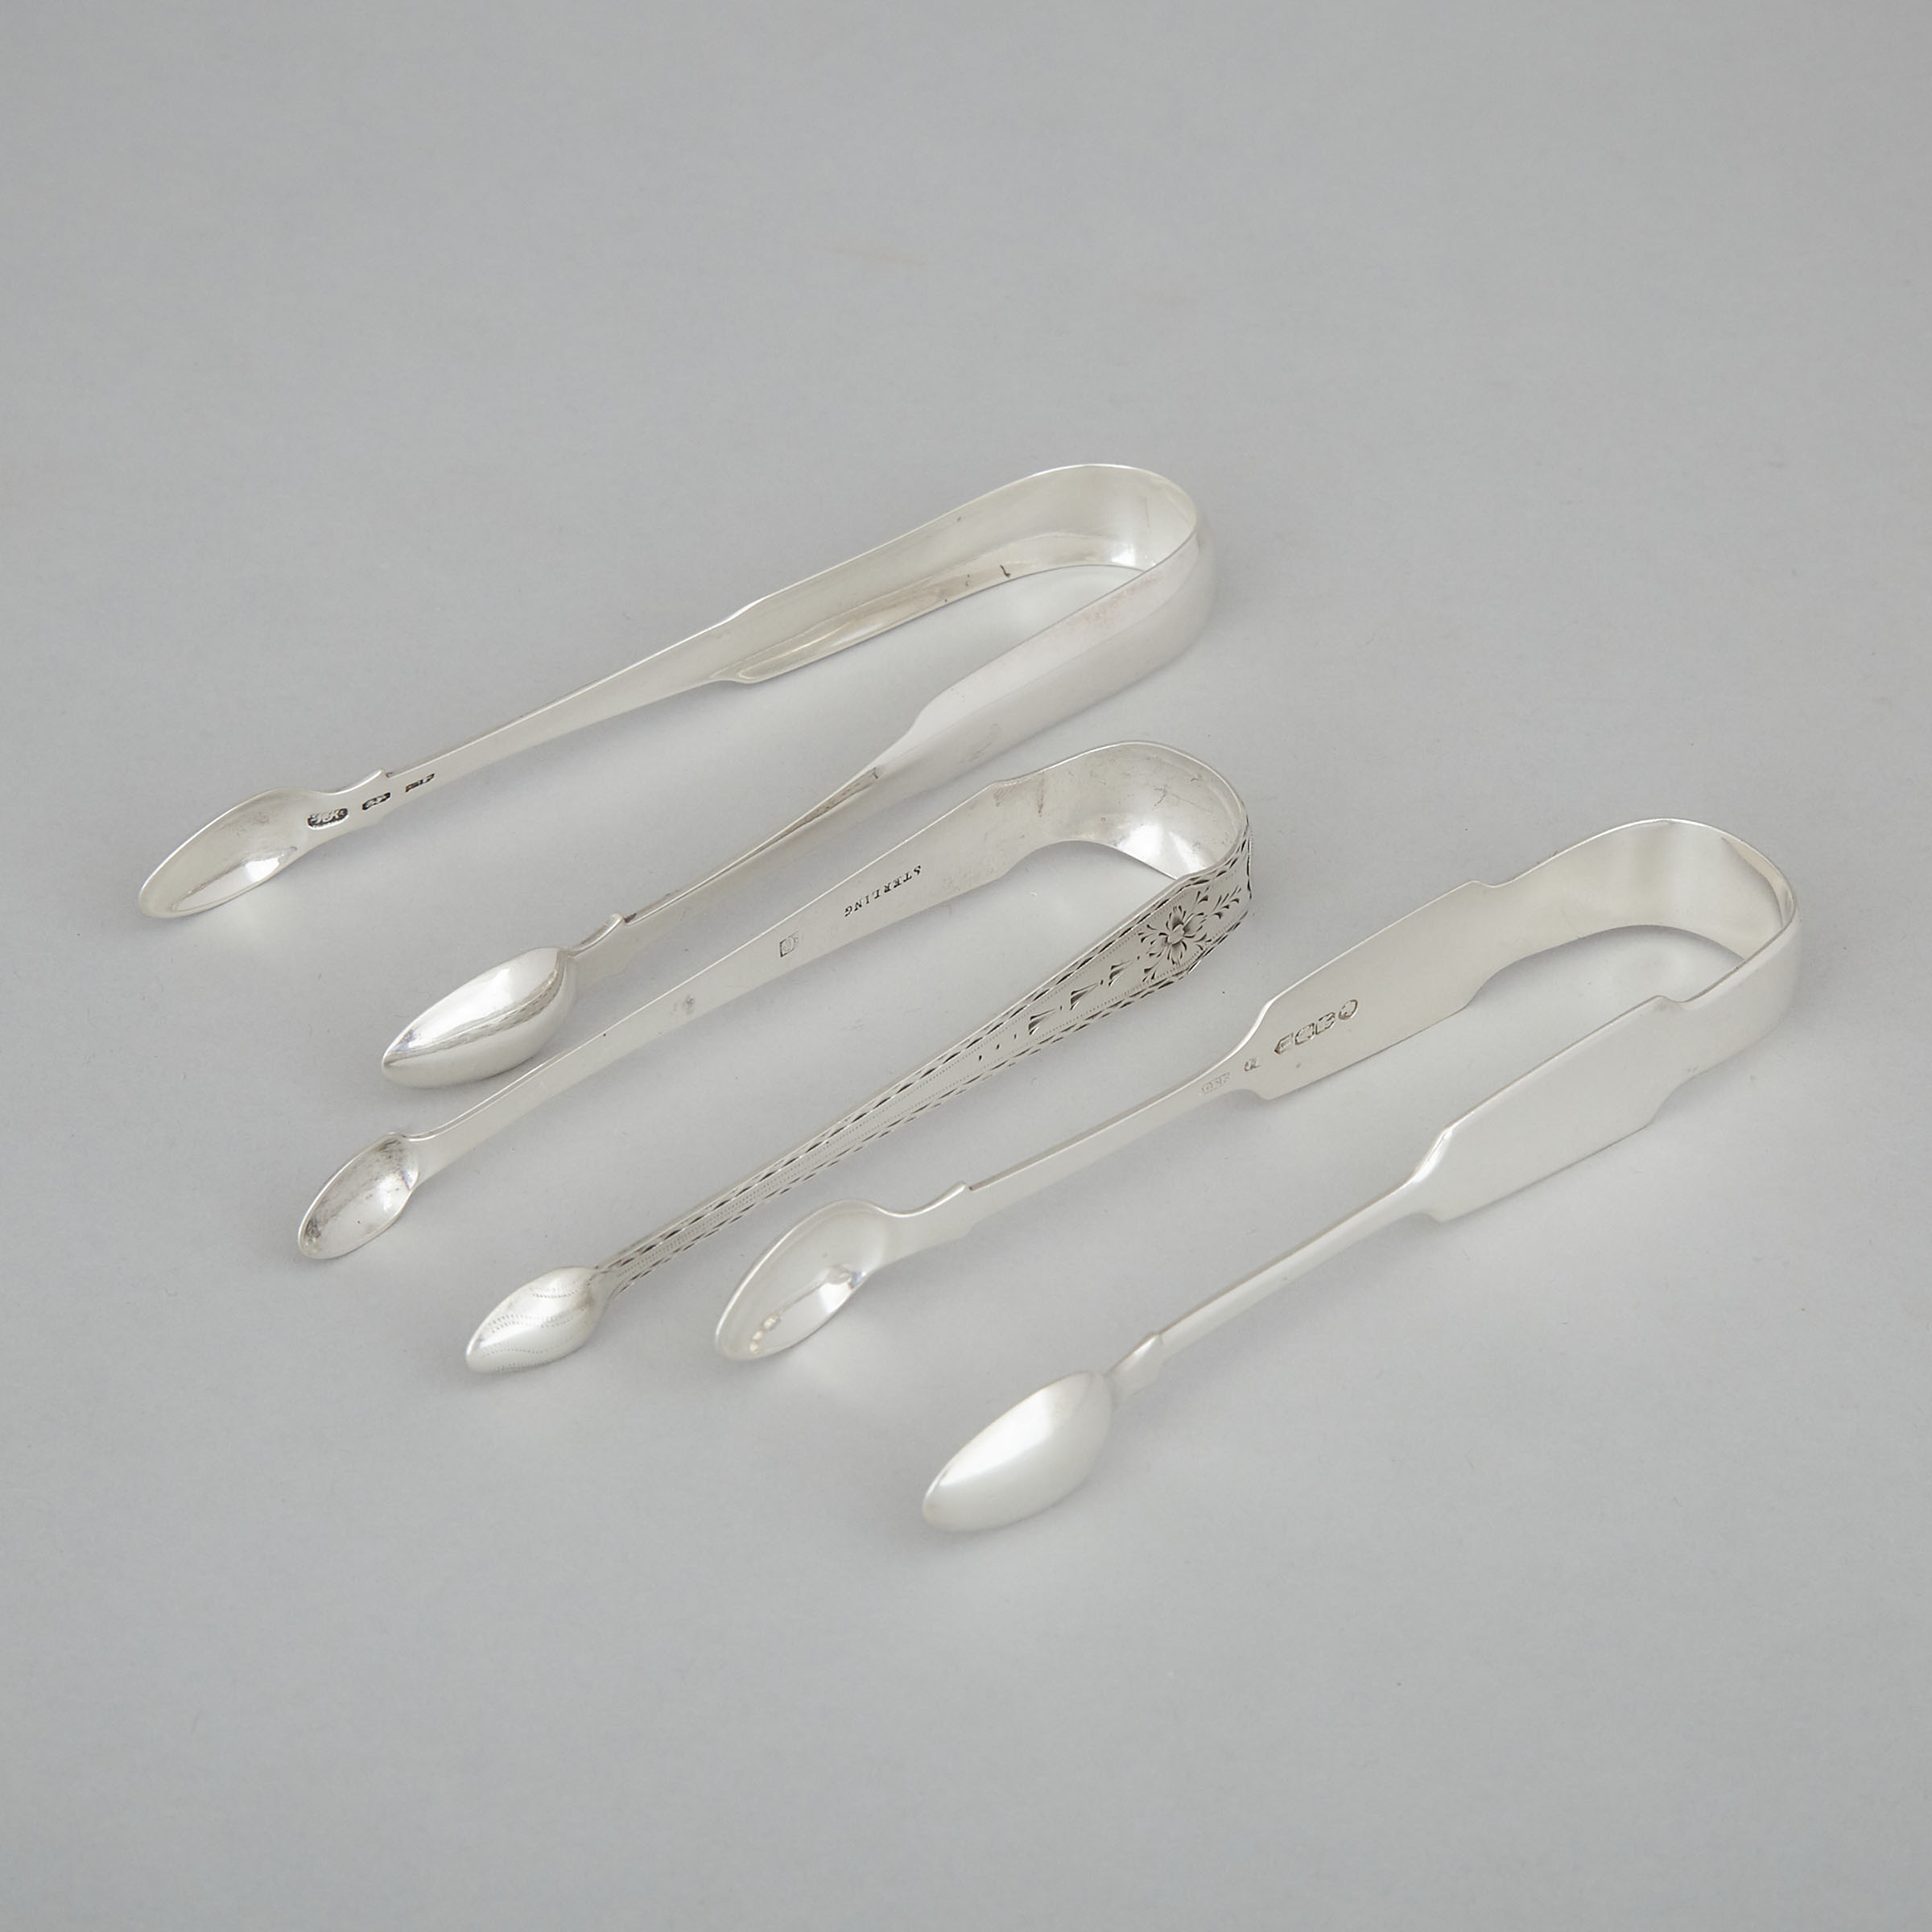 Irish Provincial Silver Sugar Tongs, Joseph Gibson, Cork, c.1790 and Two Others, Dublin, c.1805 and 1840